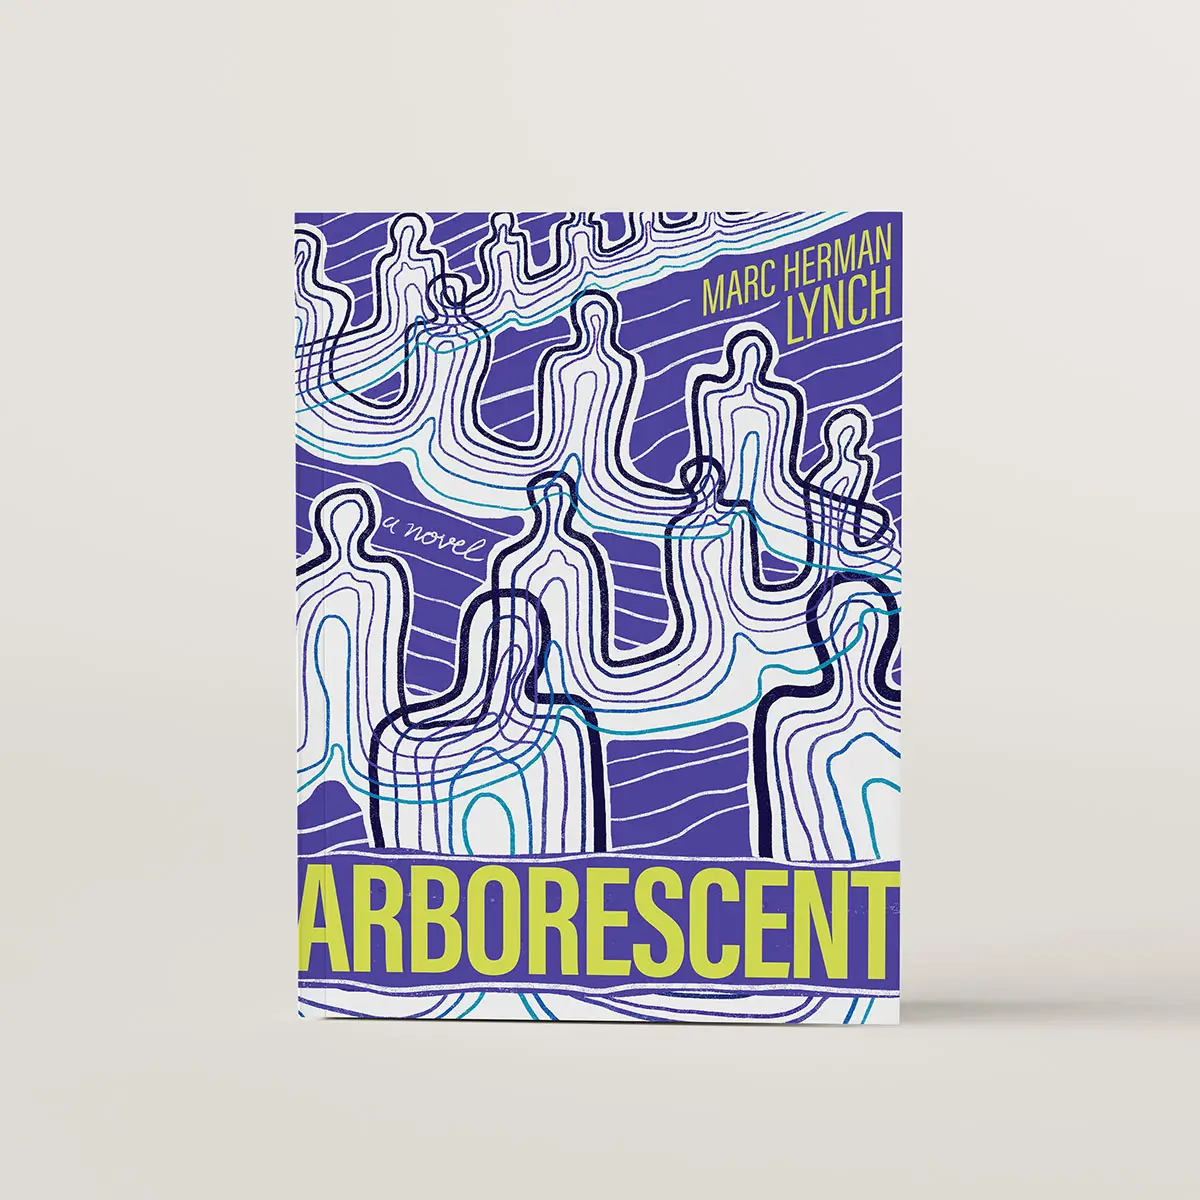 Book cover of novel Arborescent by Marc Lynch. The book is digitally illustrated featuring a series of outlined bodies all connected with an endless number of lines as the bodies continue and recede into the background. the background is bright purple. 